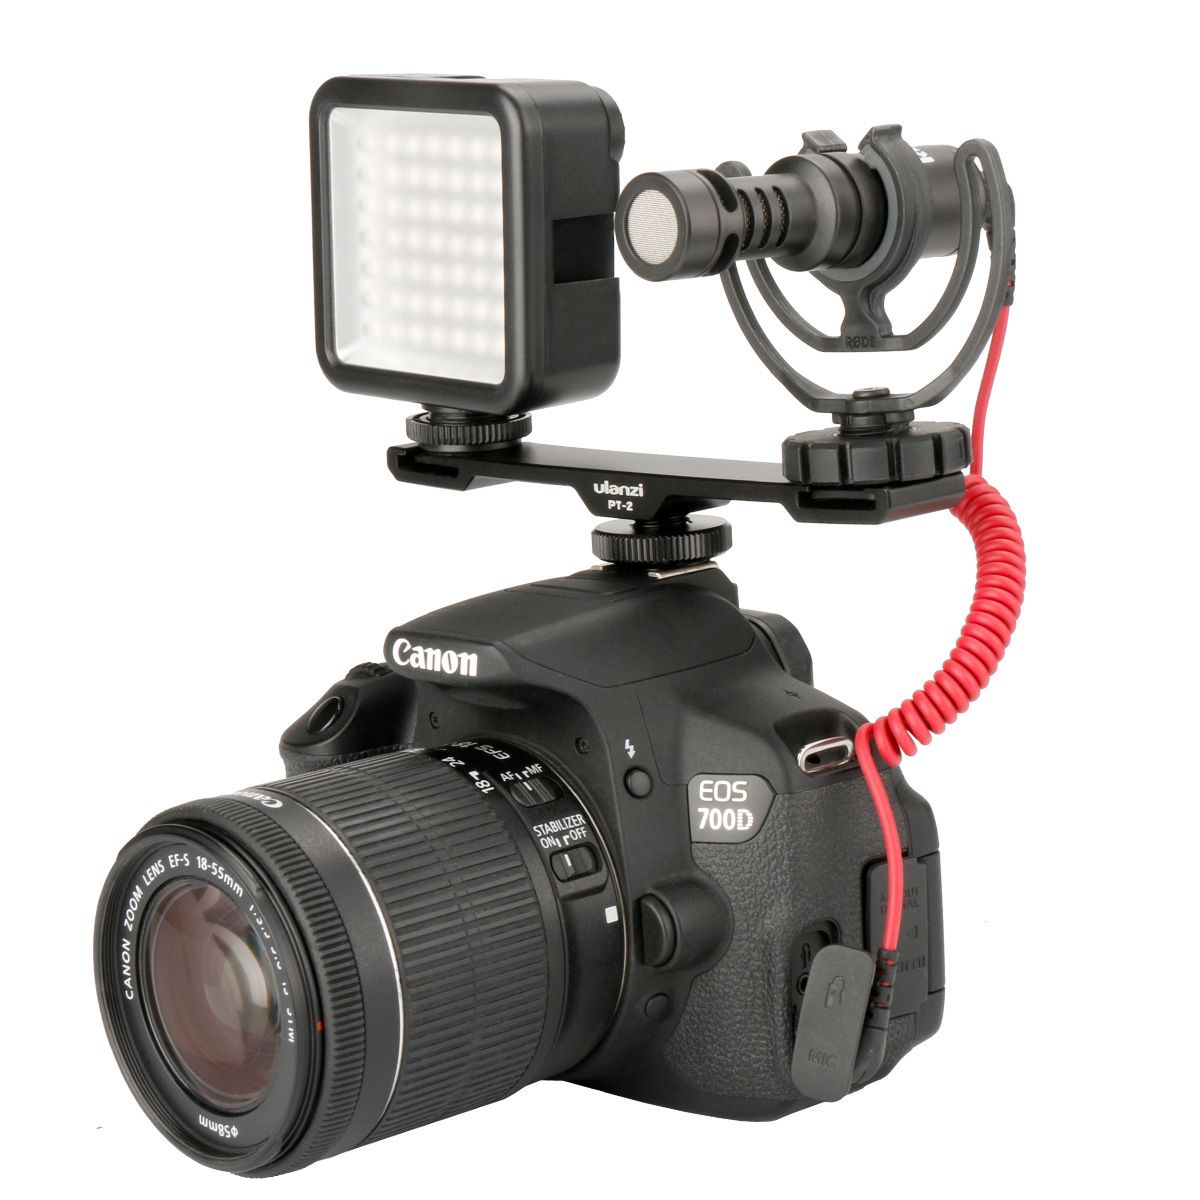 Ulanzi-PT-2-Dual-Cold-Shoe-Flash-Photography-14-Thread-Bracket-Plate-for-Microphone-Flash-Light-1290796